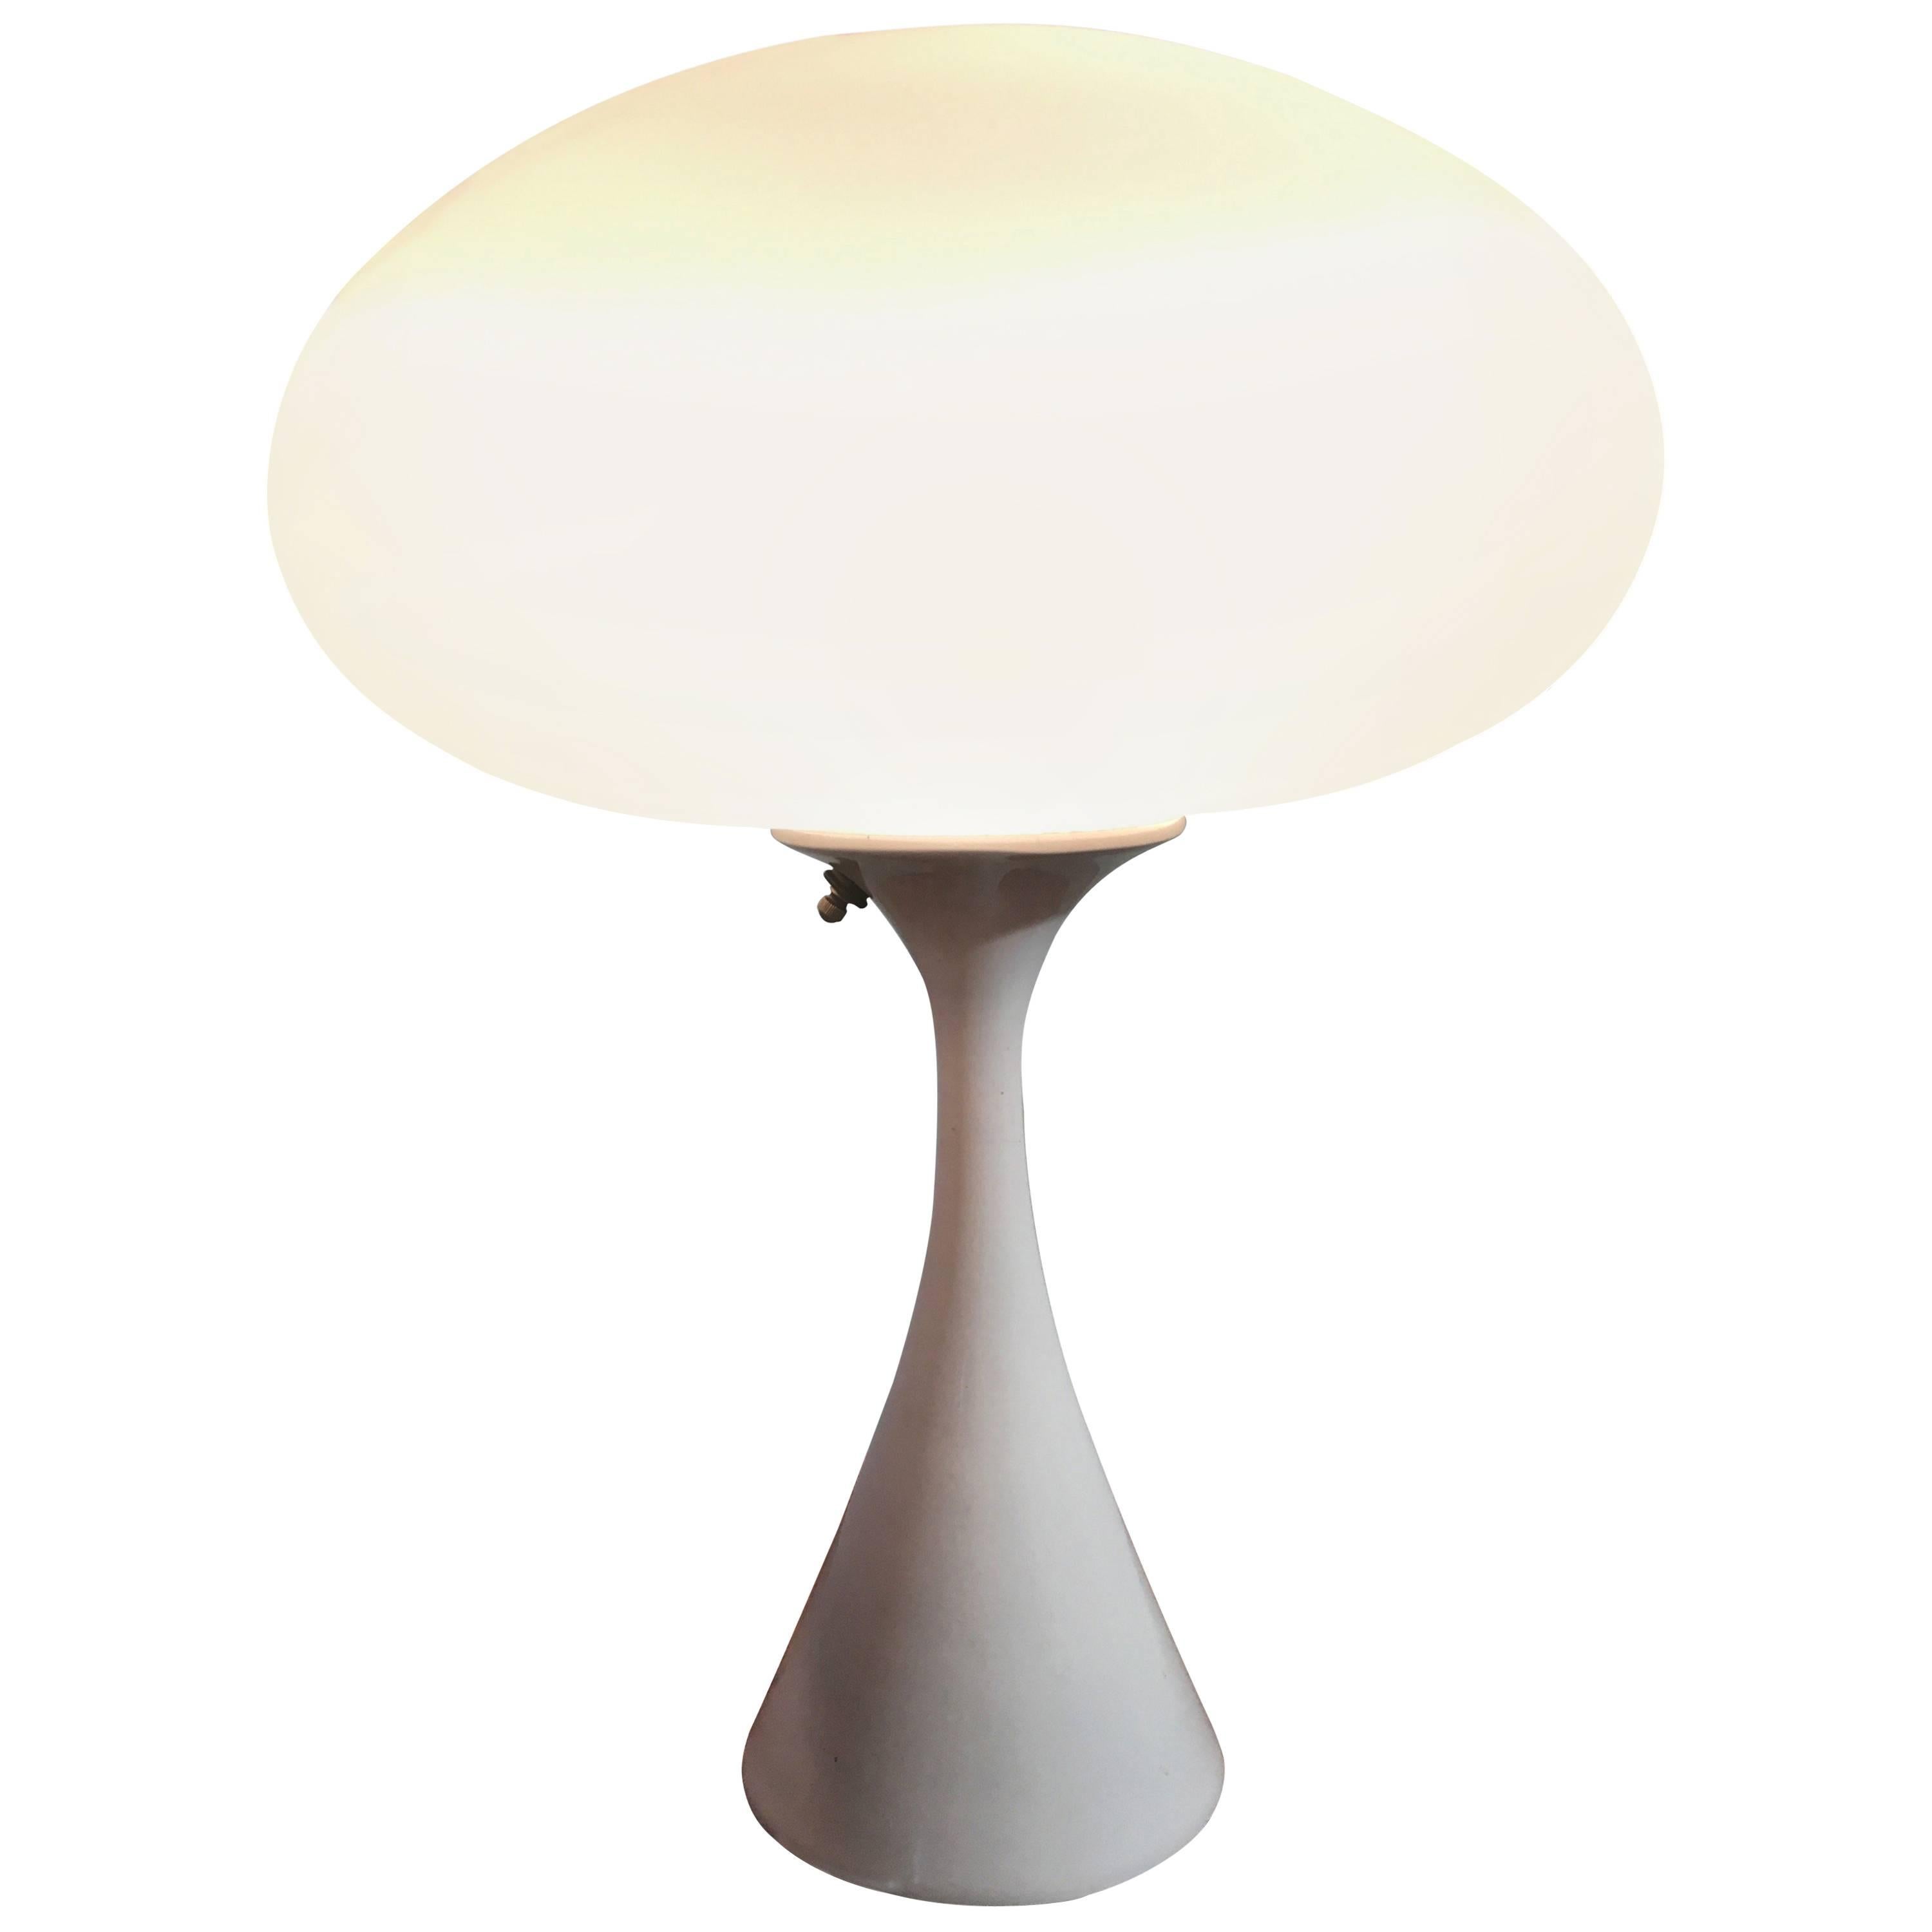 Early Bill Curry for Laurel Mushroom Table Lamp, circa 1960